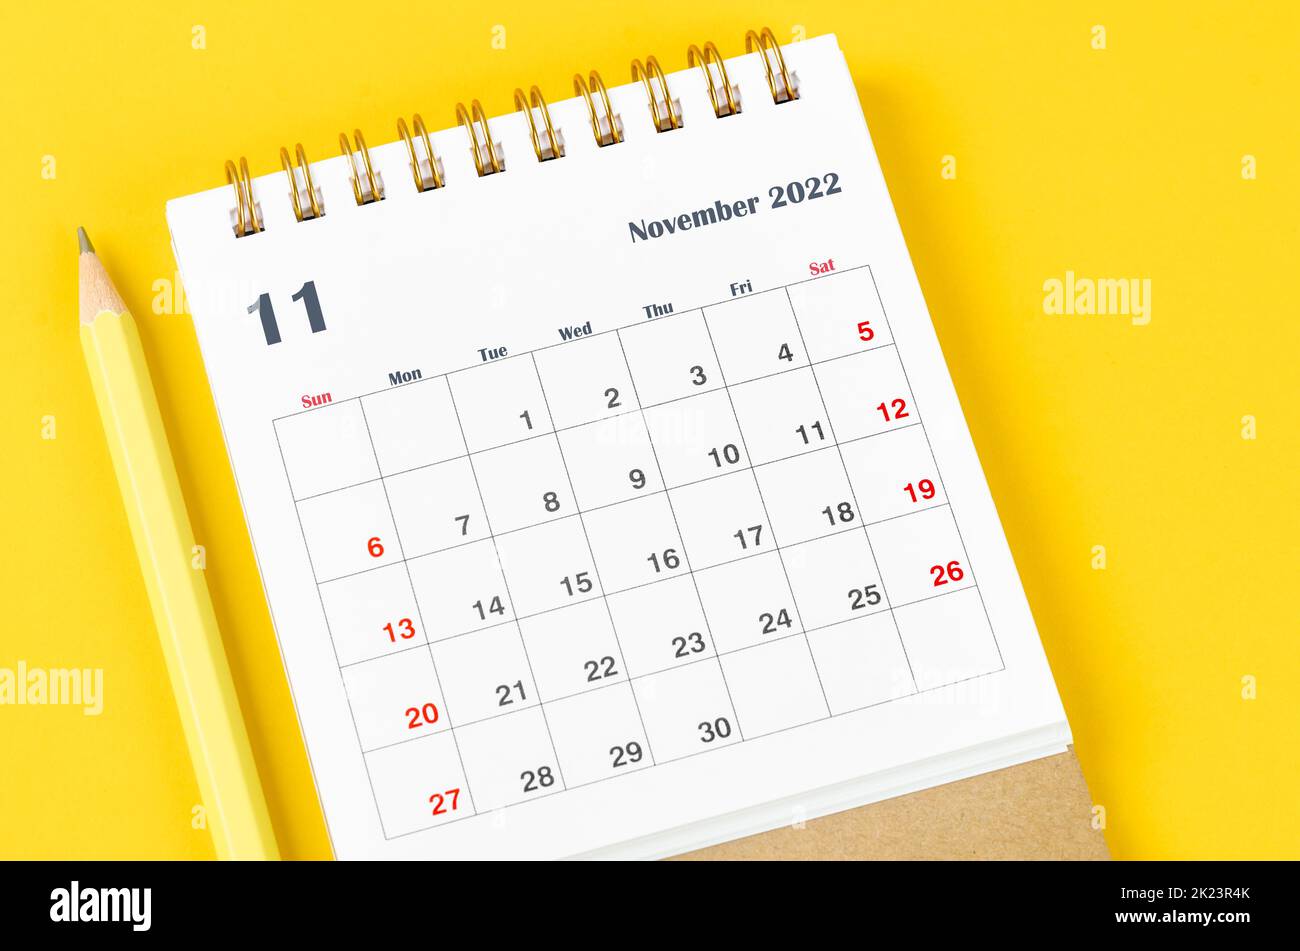 November 2022 Monthly desk calendar for 2022 with pencil on yellow background. Stock Photo